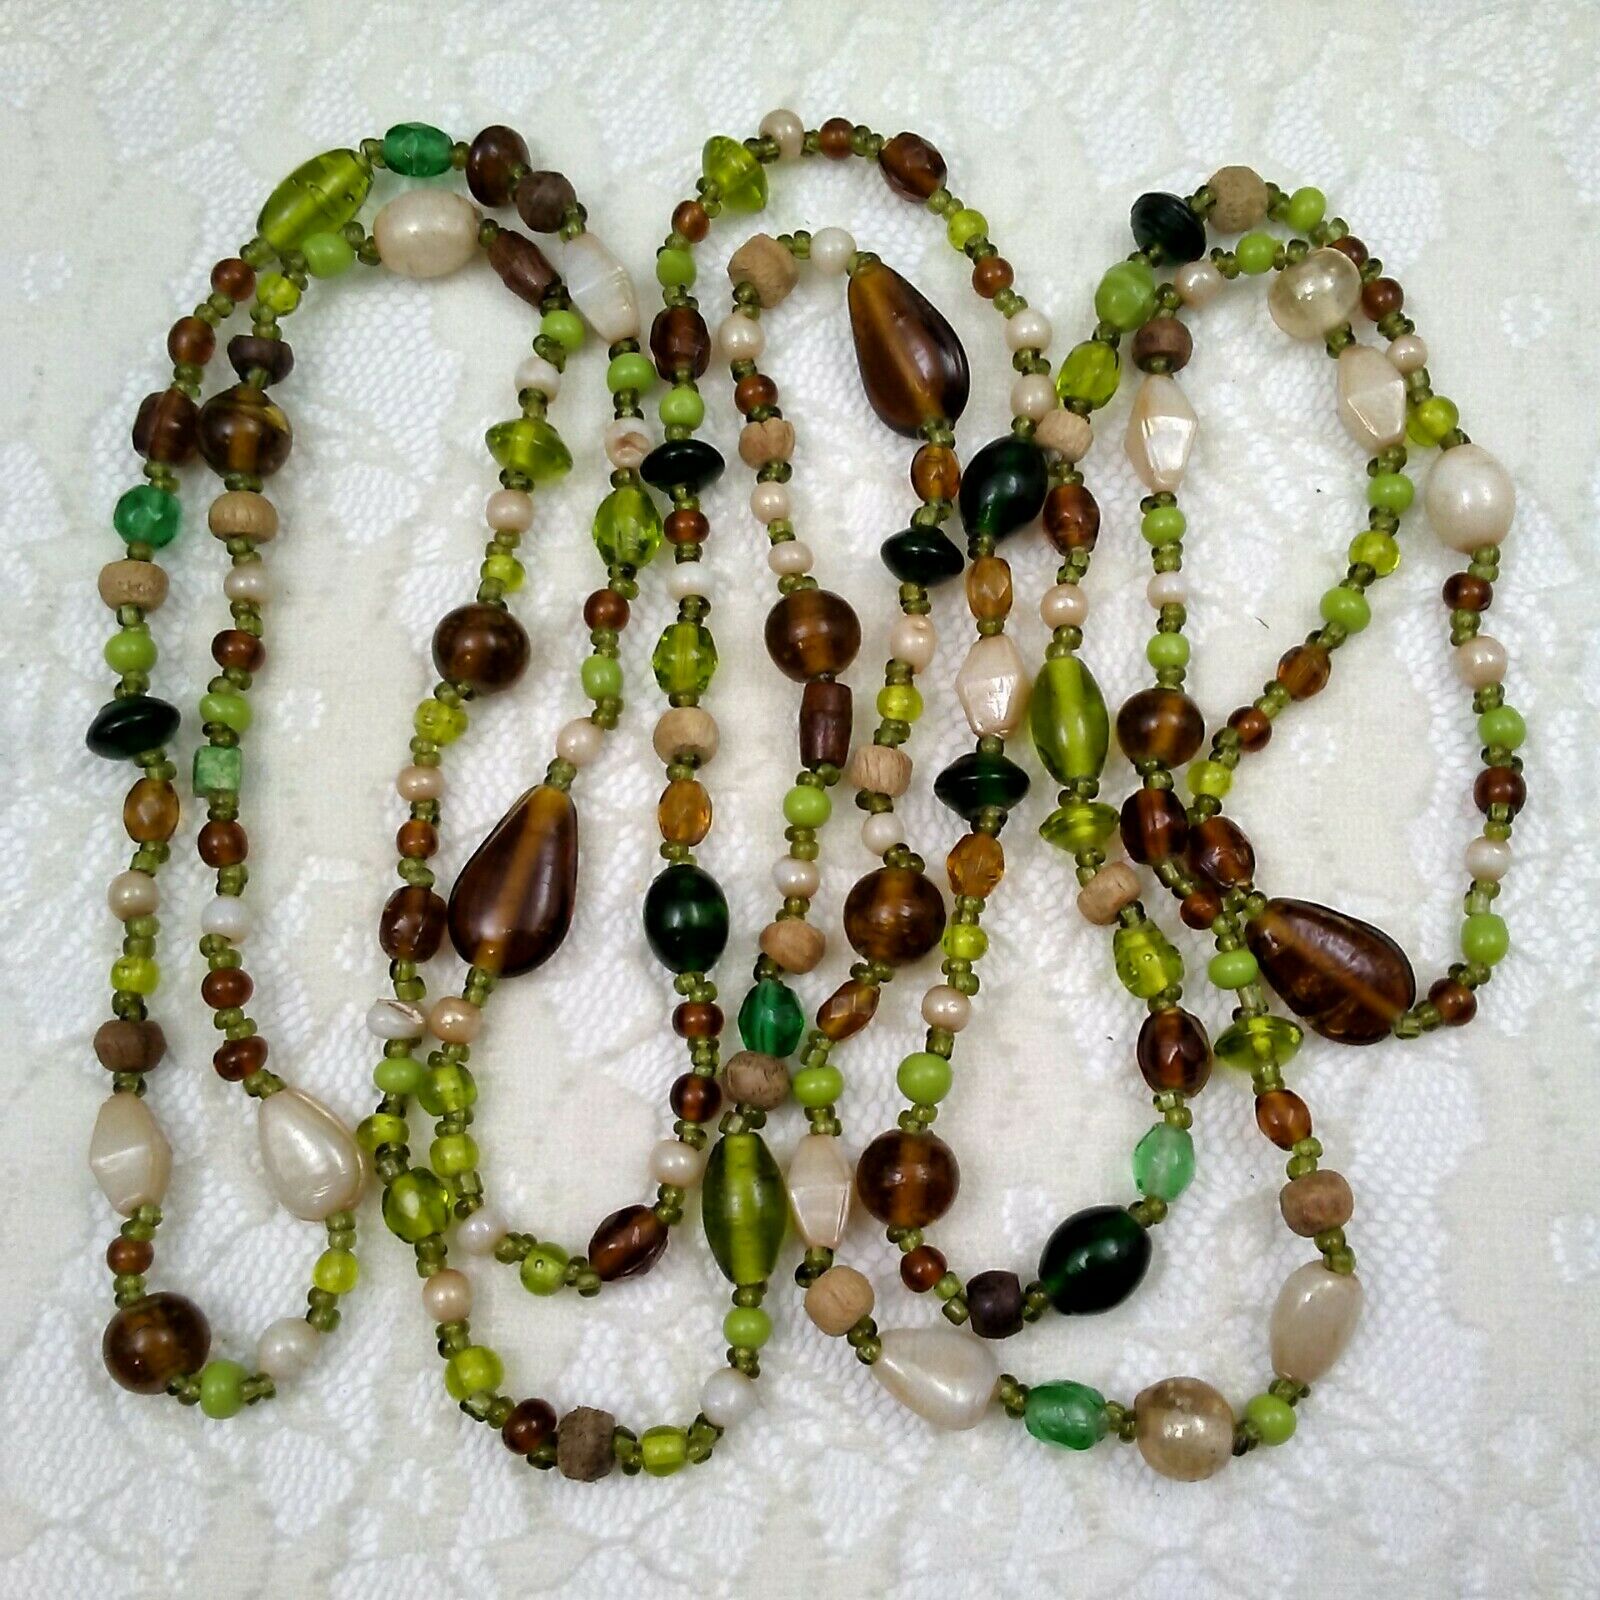 Estate Sale: Glass & Wood Beaded Necklace Continuous 60" #18-22